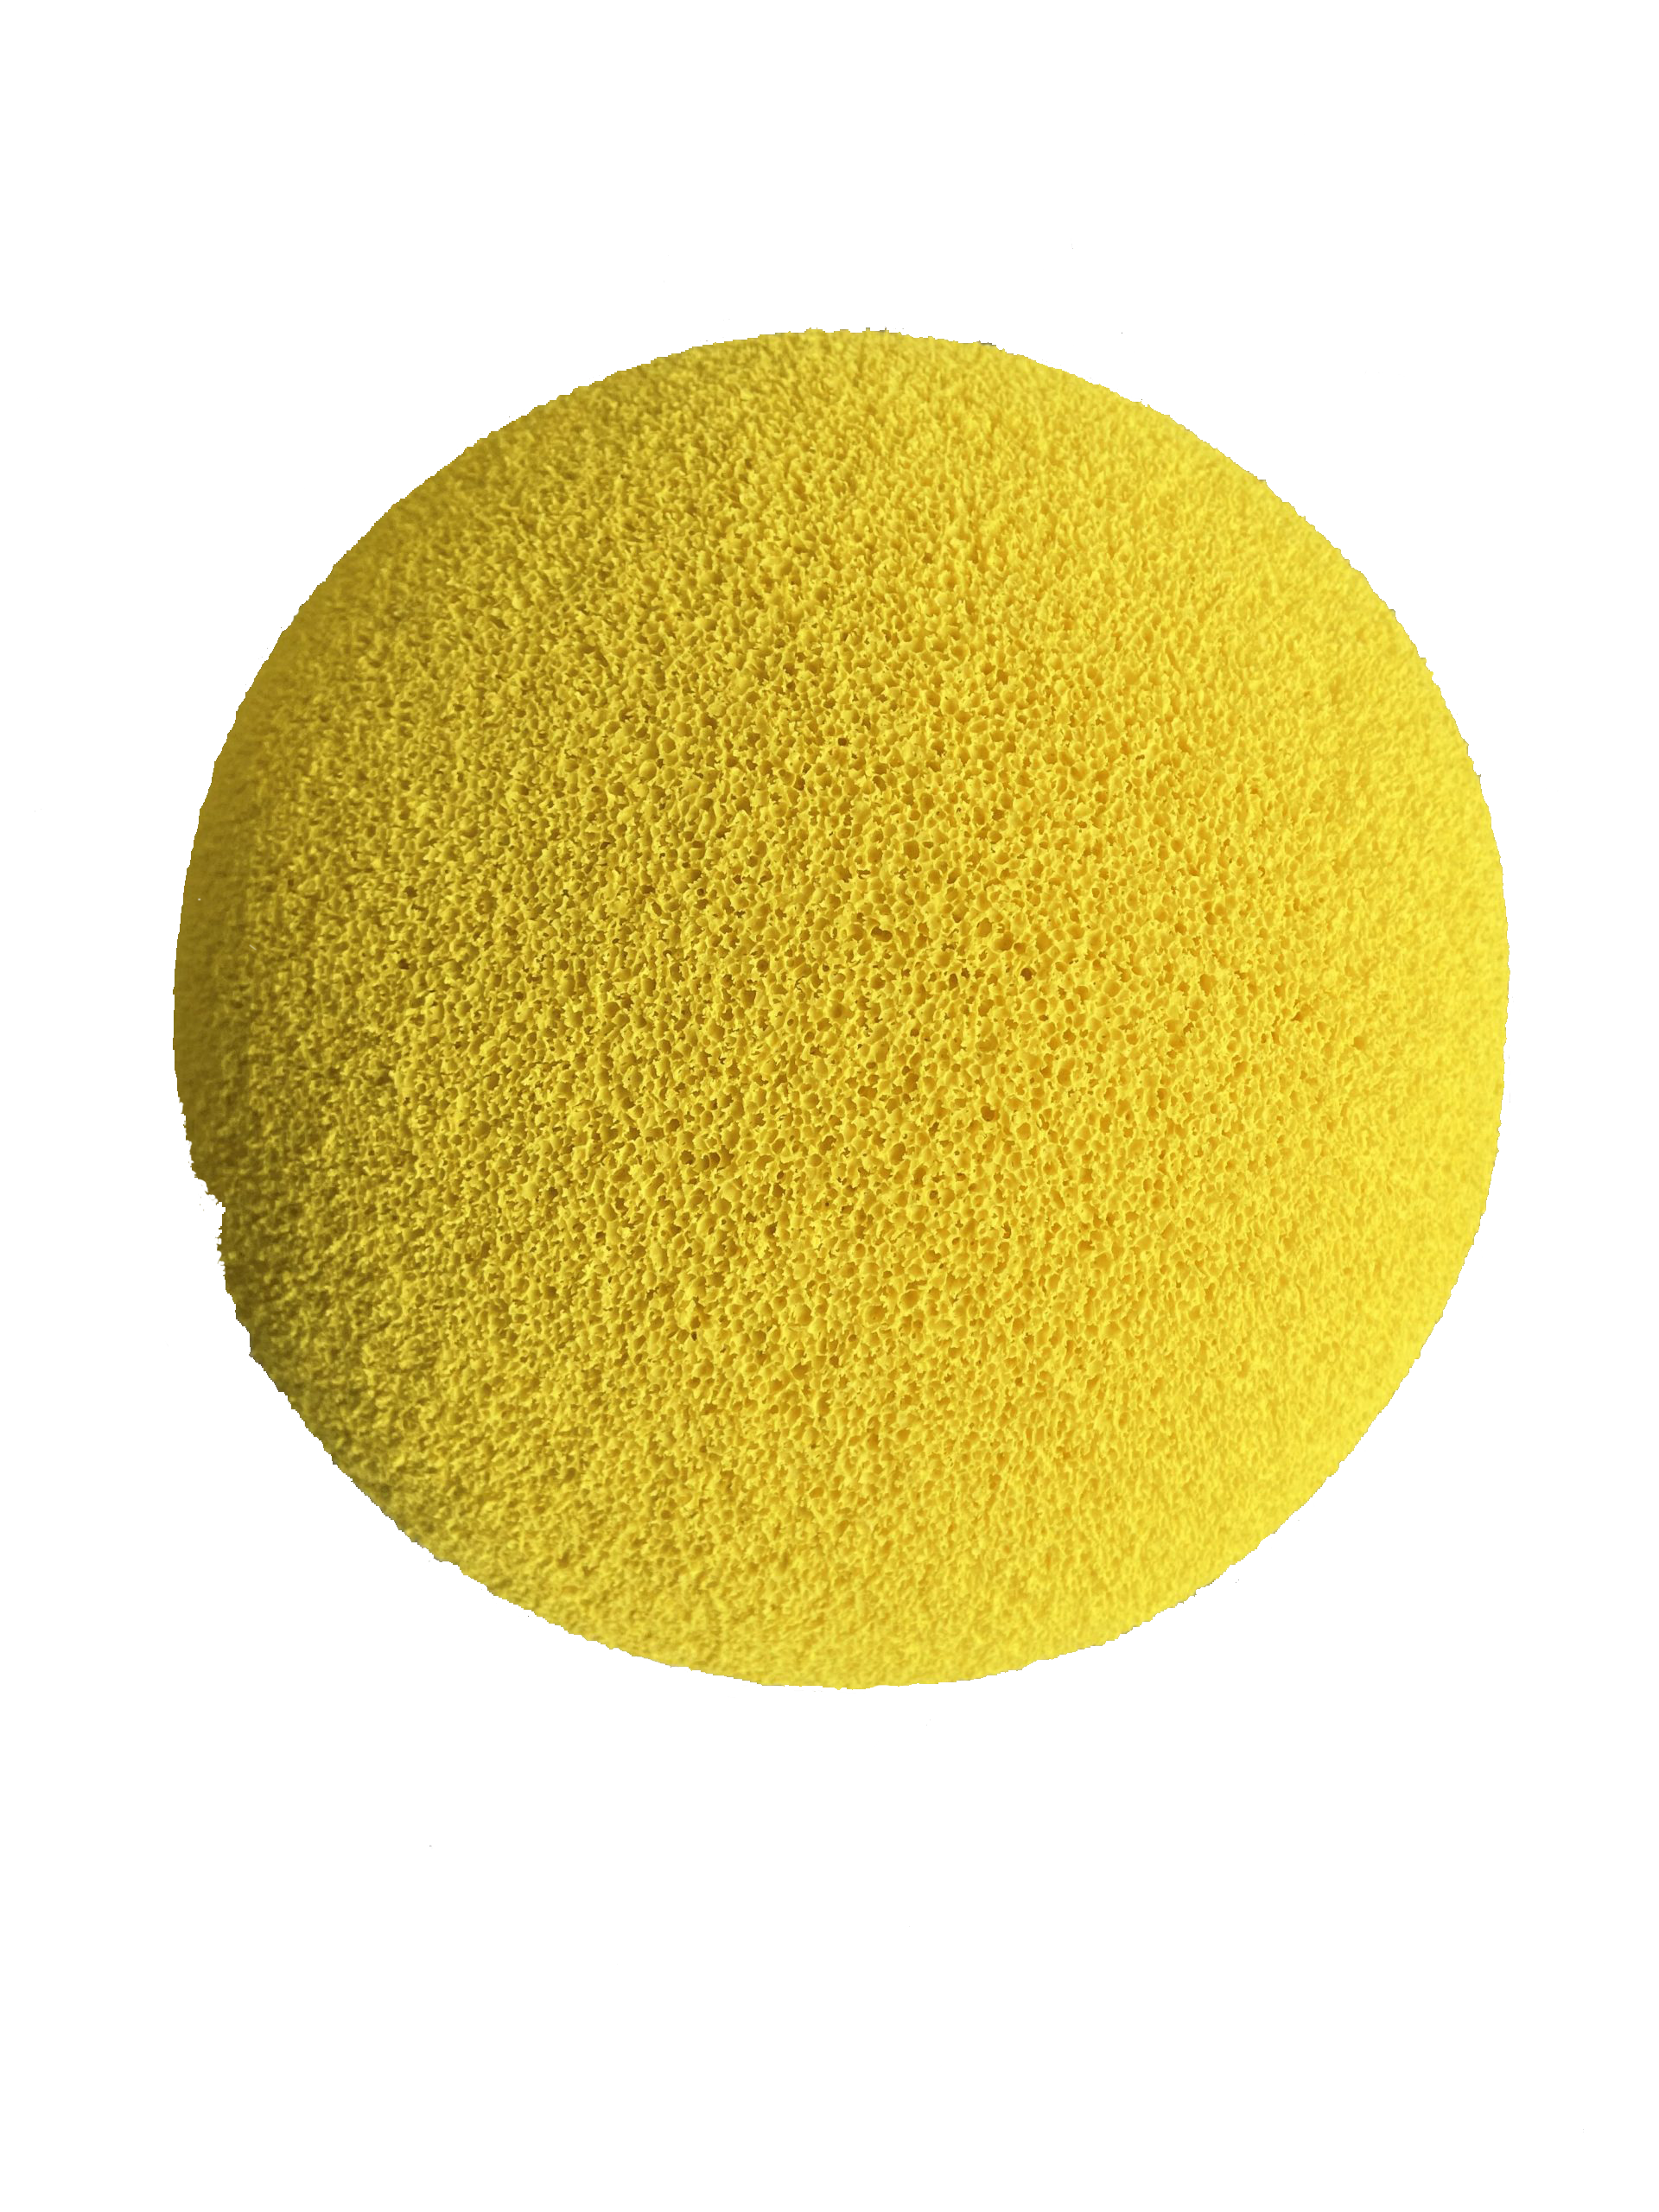 https://irrigationsupplyparts.com/wp-content/uploads/2017/07/Yellow-COB-1-scaled-1.png